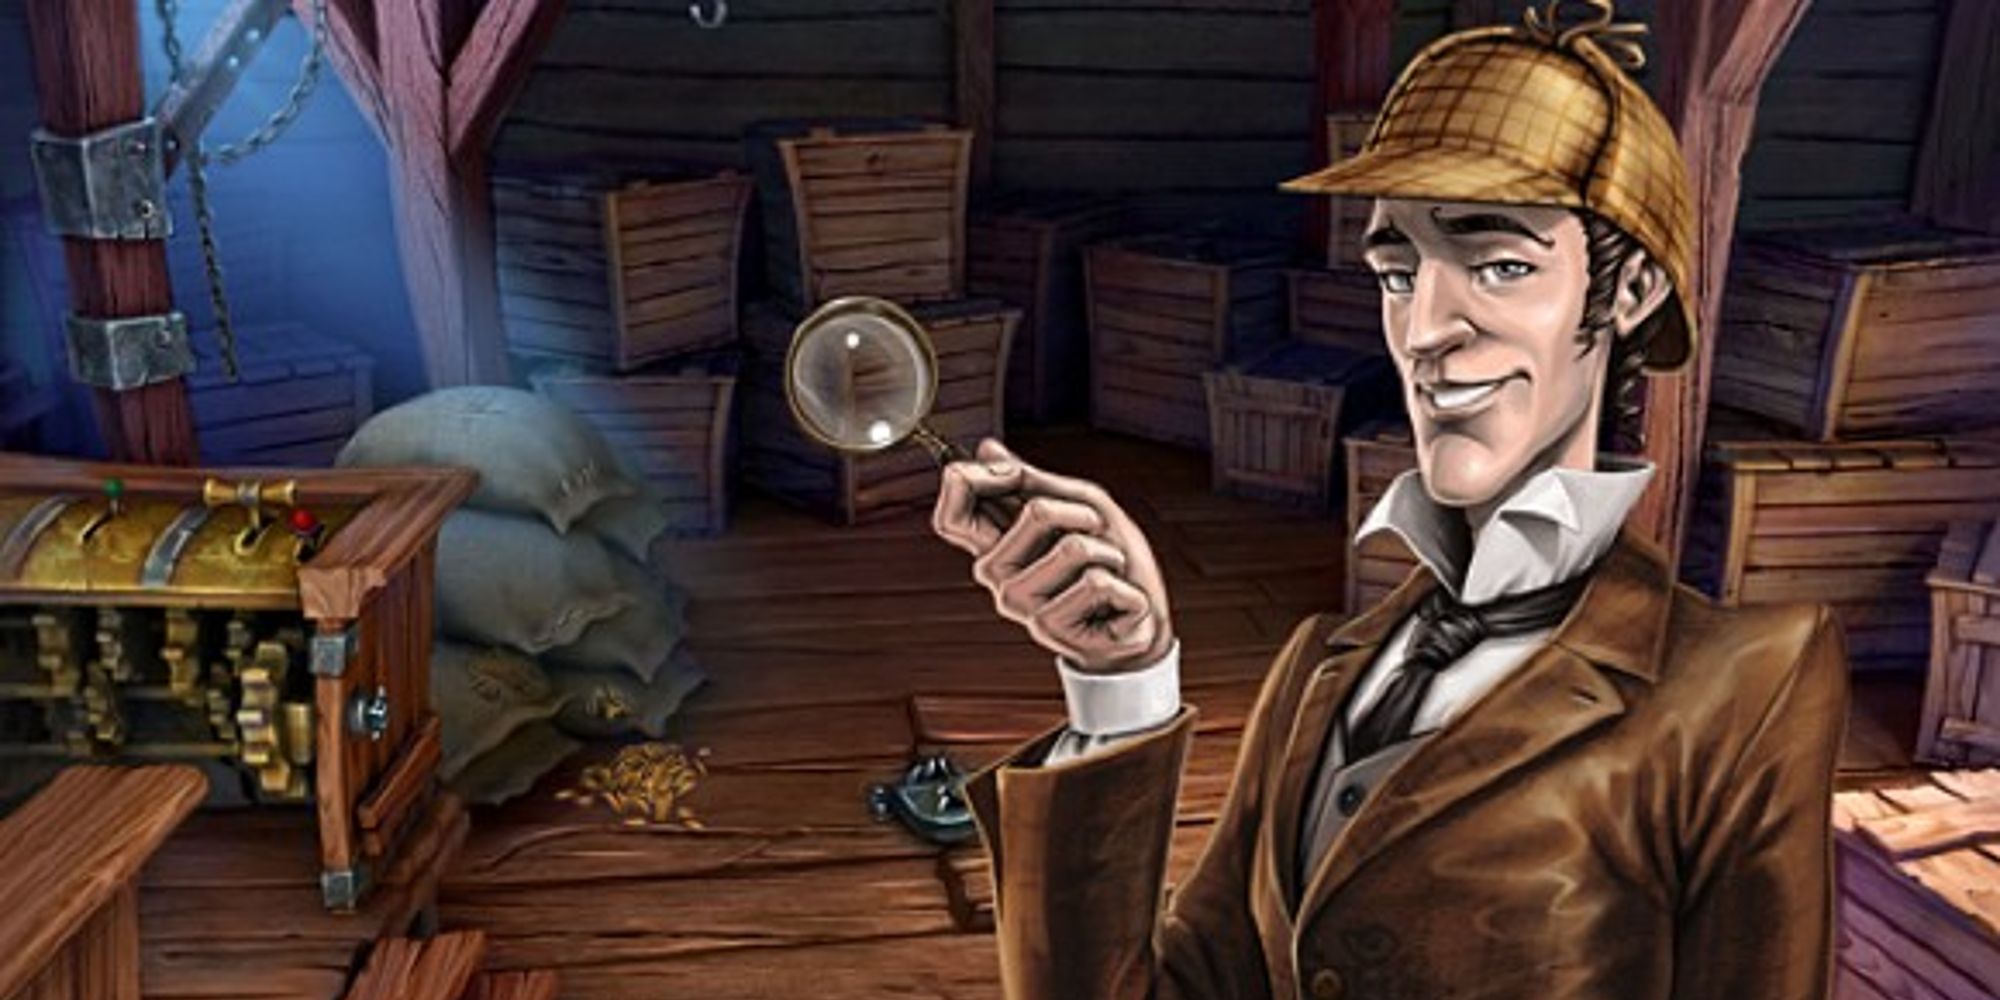 Sherlock holding a magnifying glass in Sherlock Holmes and The Mystery Of Osborne House